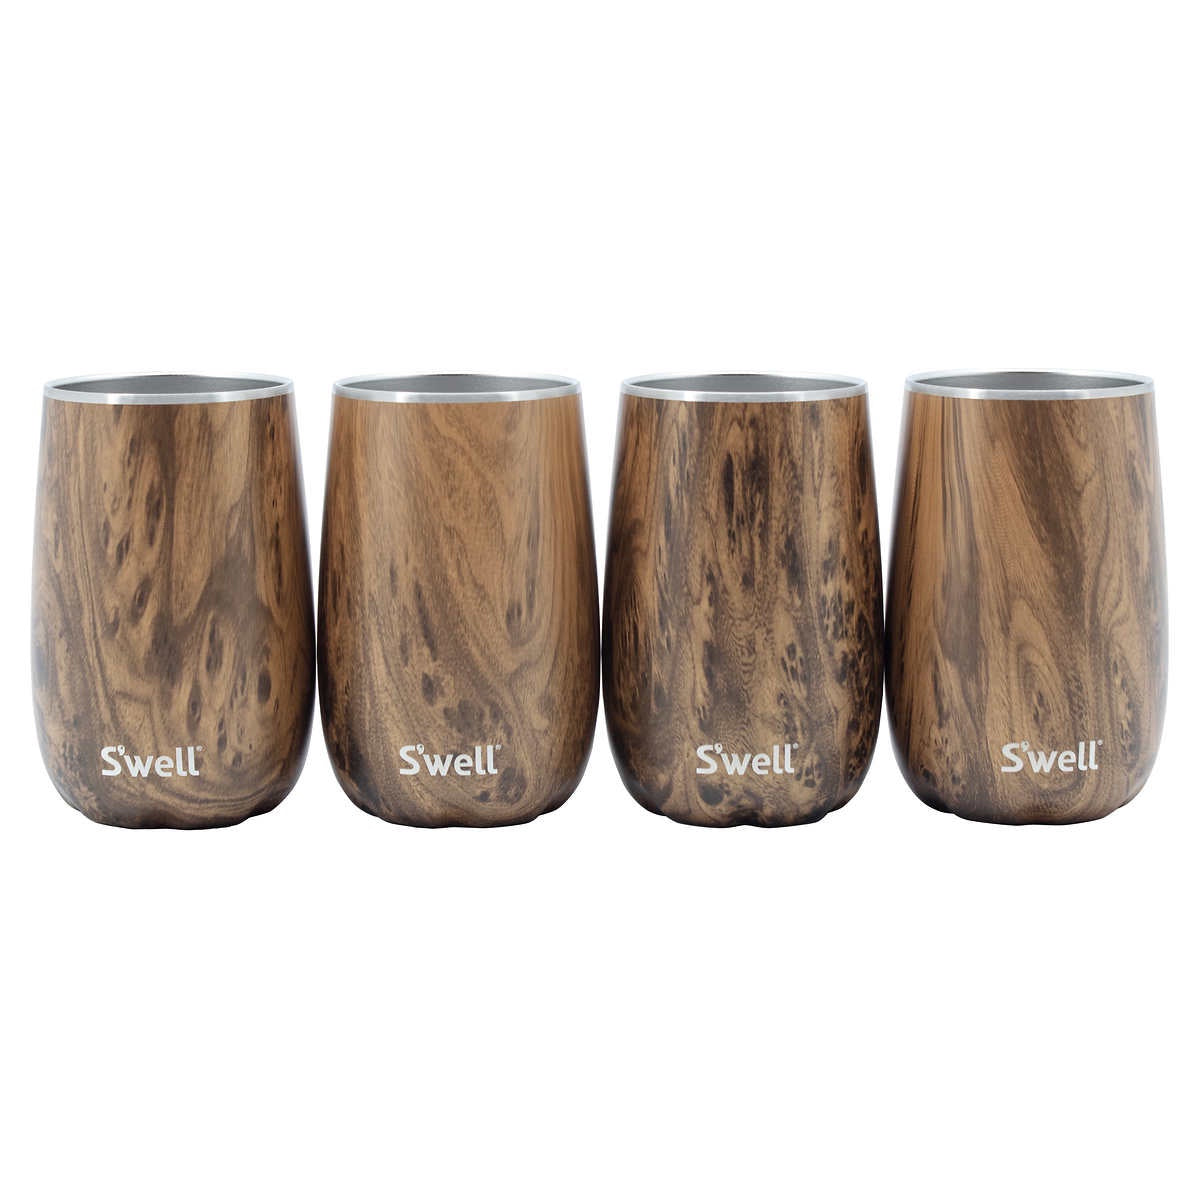 S'well Tumblers Insulated Stainless Steel 16oz 4-pack